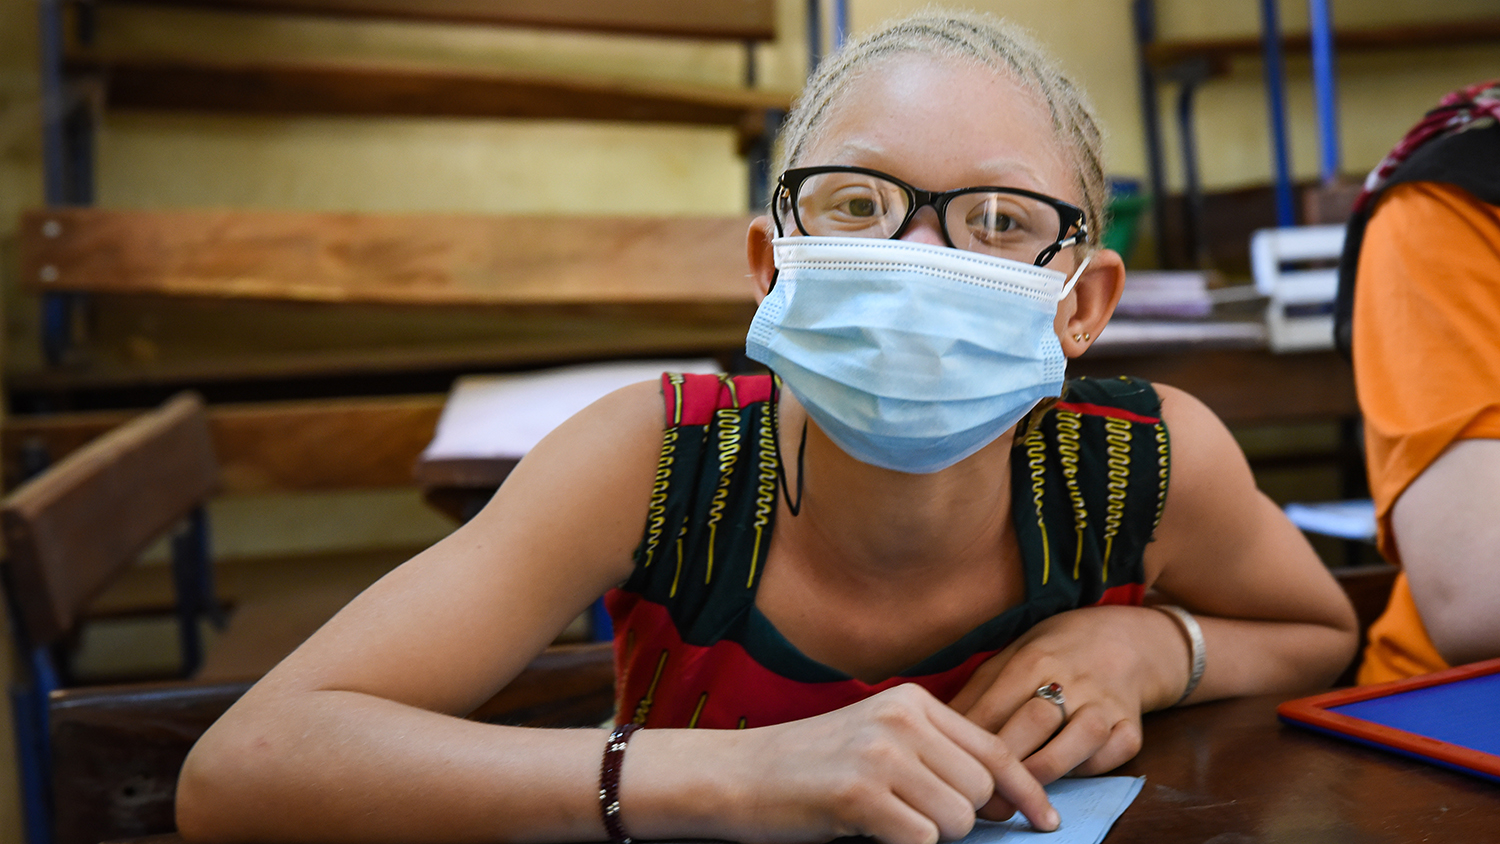 A young girl, who has albinism, sitting in a classroom. She is wearing a face mask.